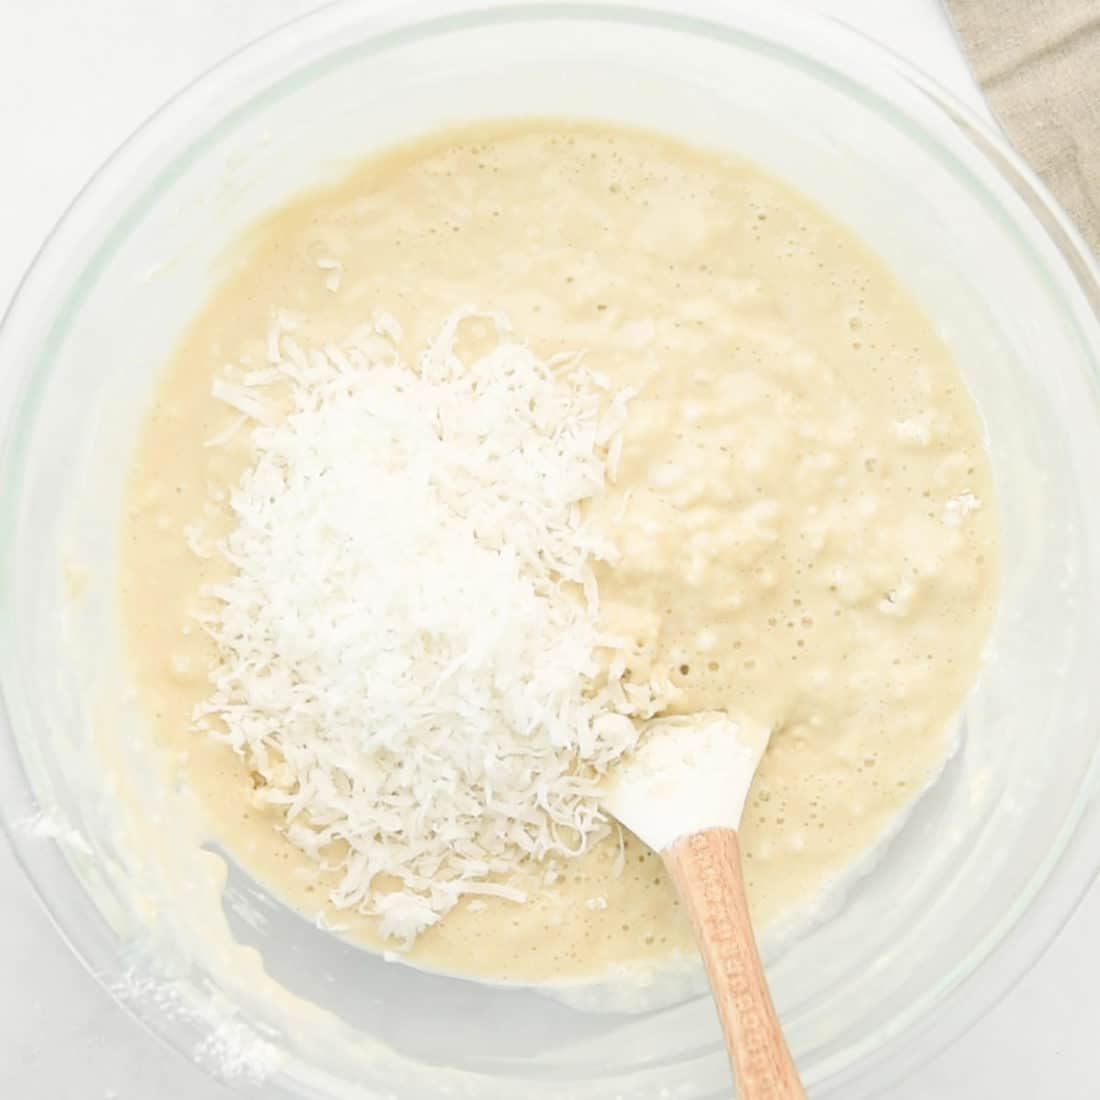 coconut in cake batter in mixing bowl